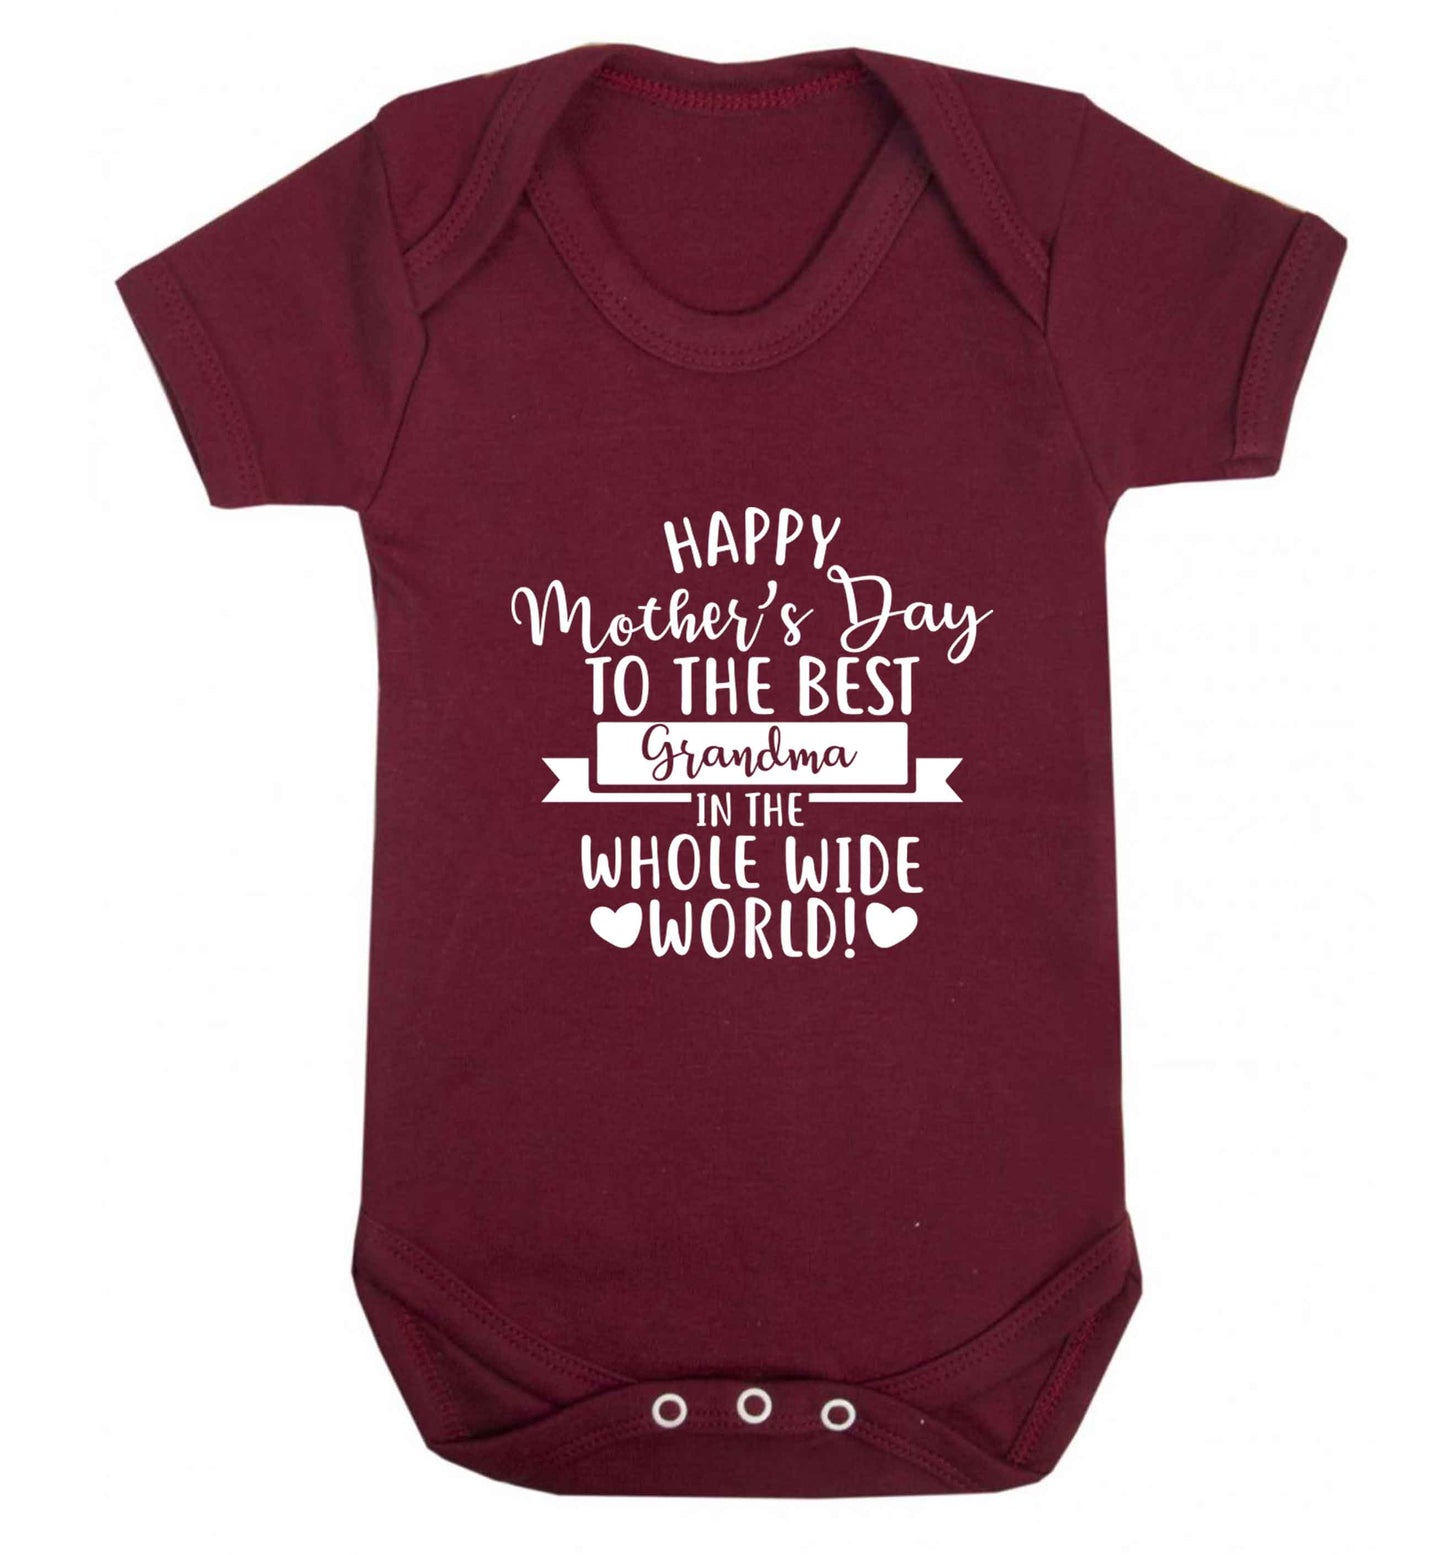 Happy mother's day to the best grandma in the world baby vest maroon 18-24 months